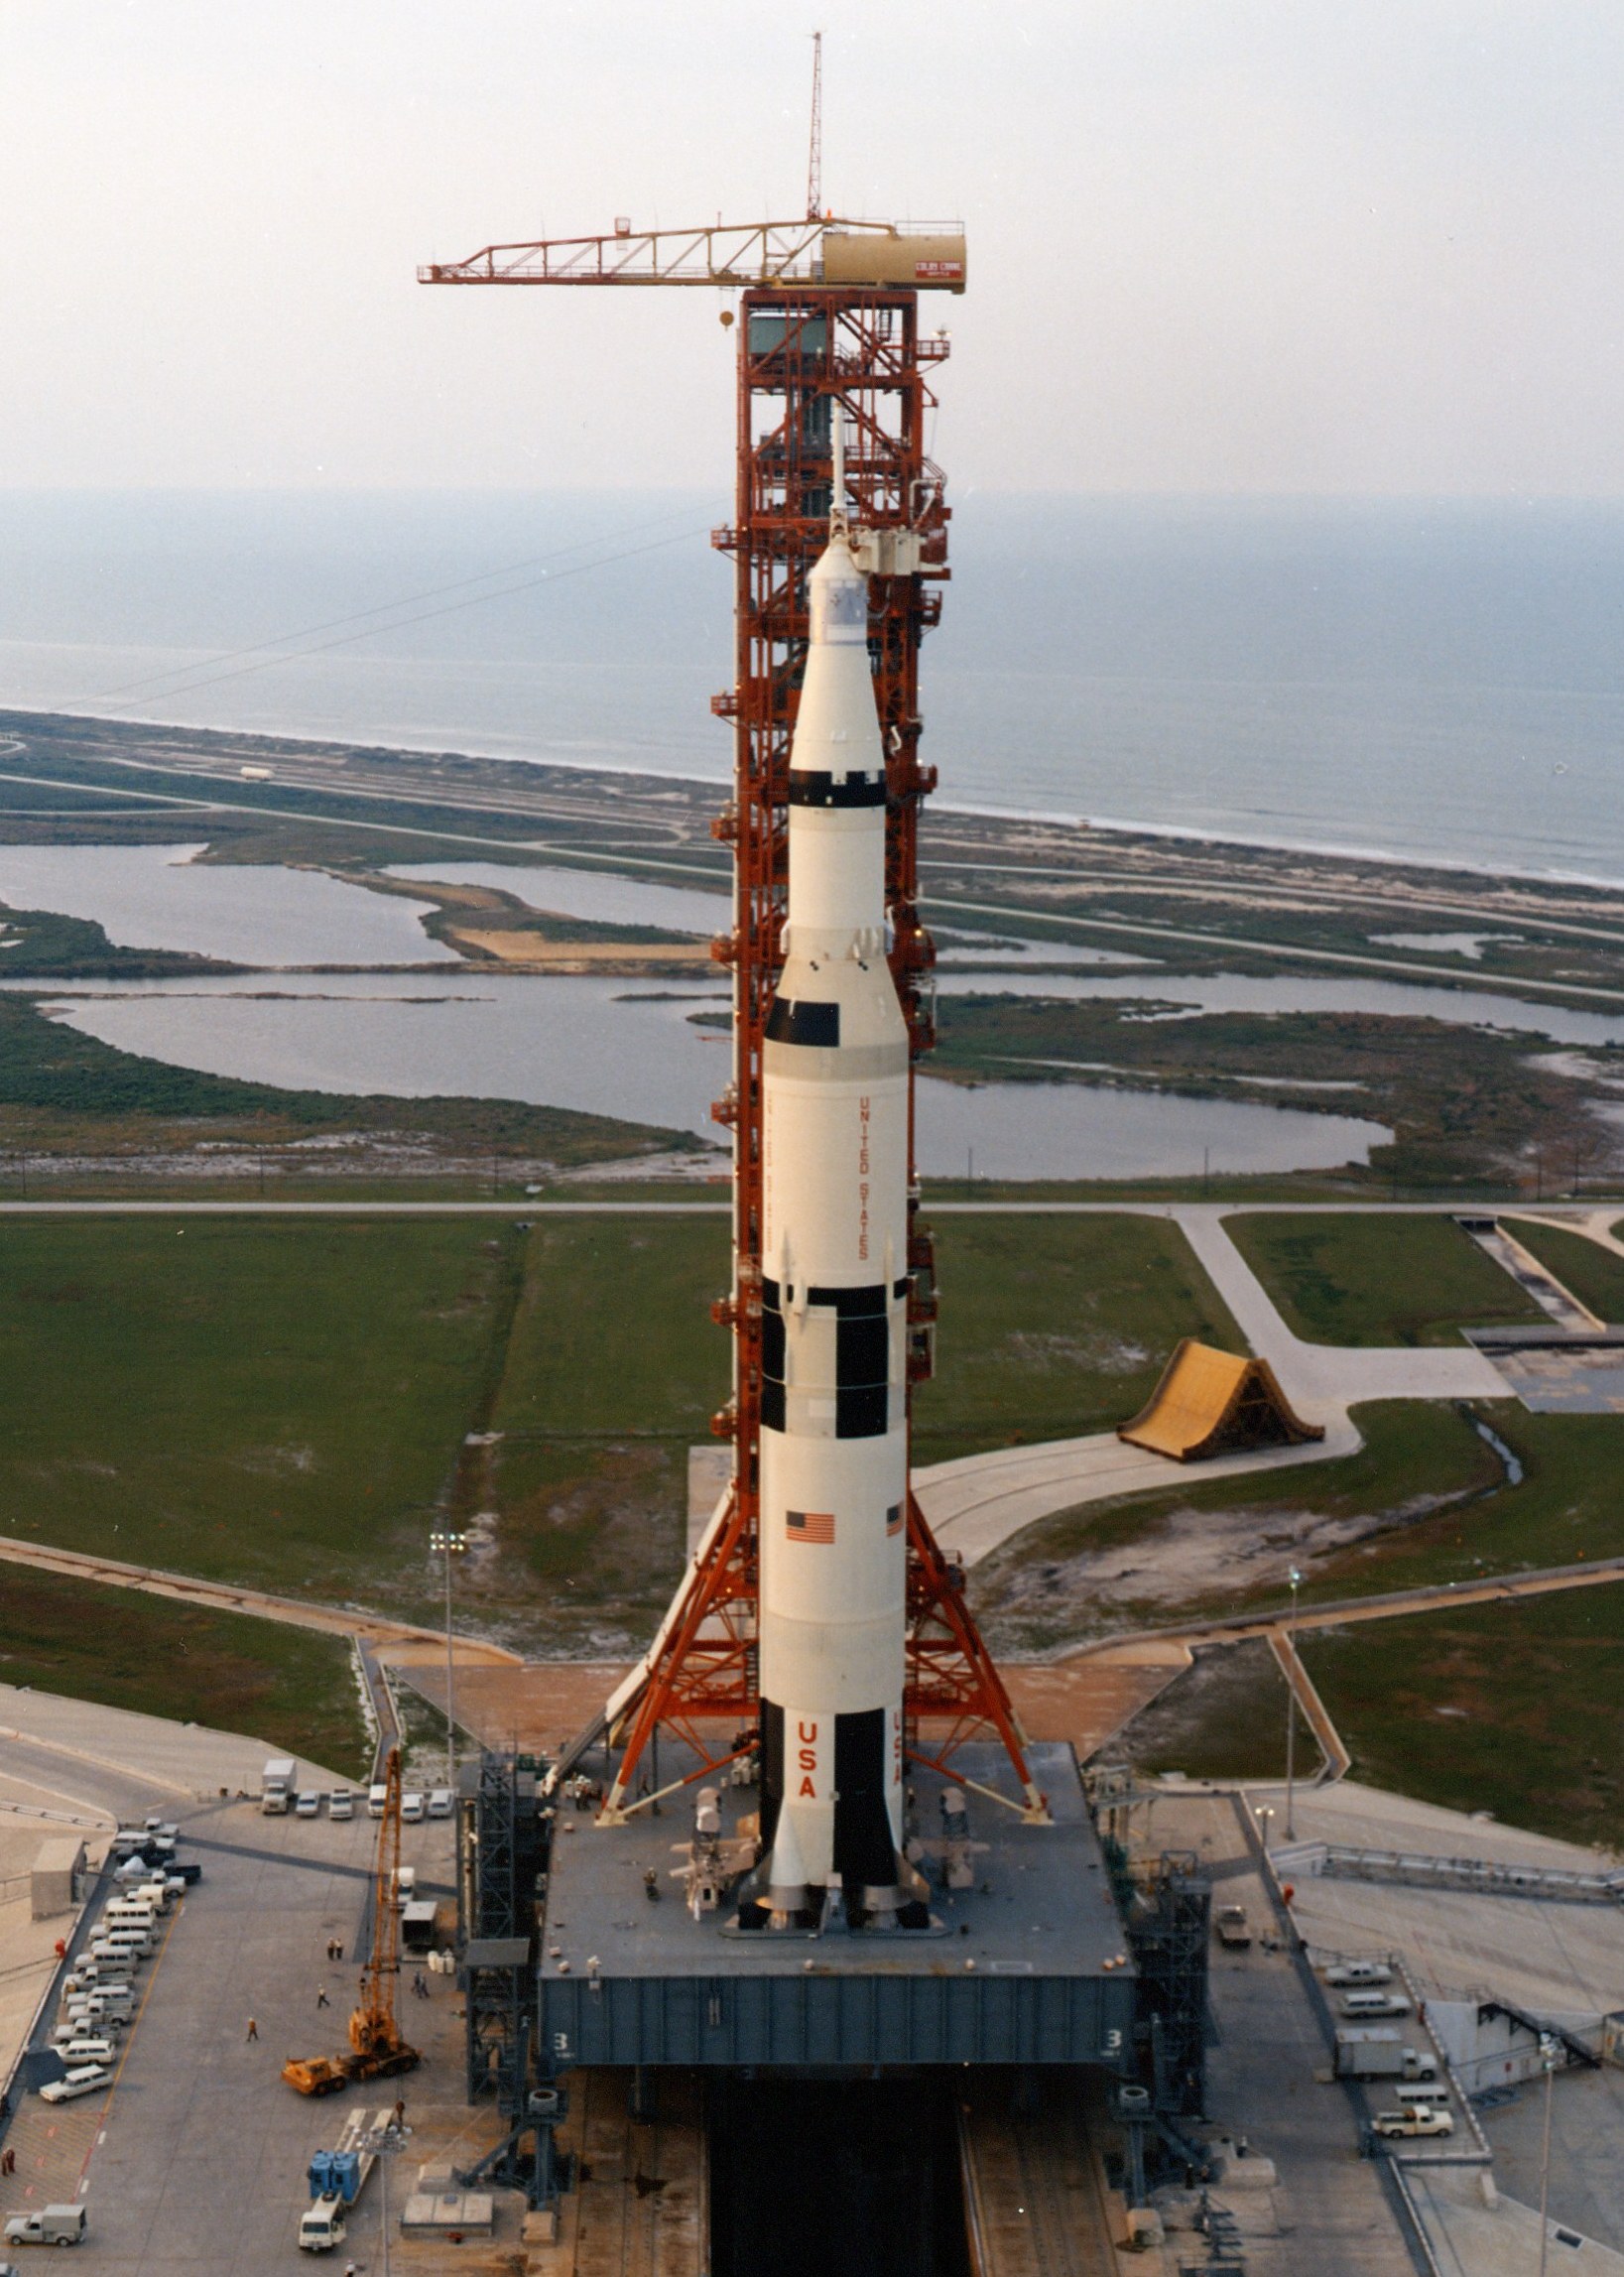 Apollo Saturn V launch hold - recycle and scrub turnaround constraints